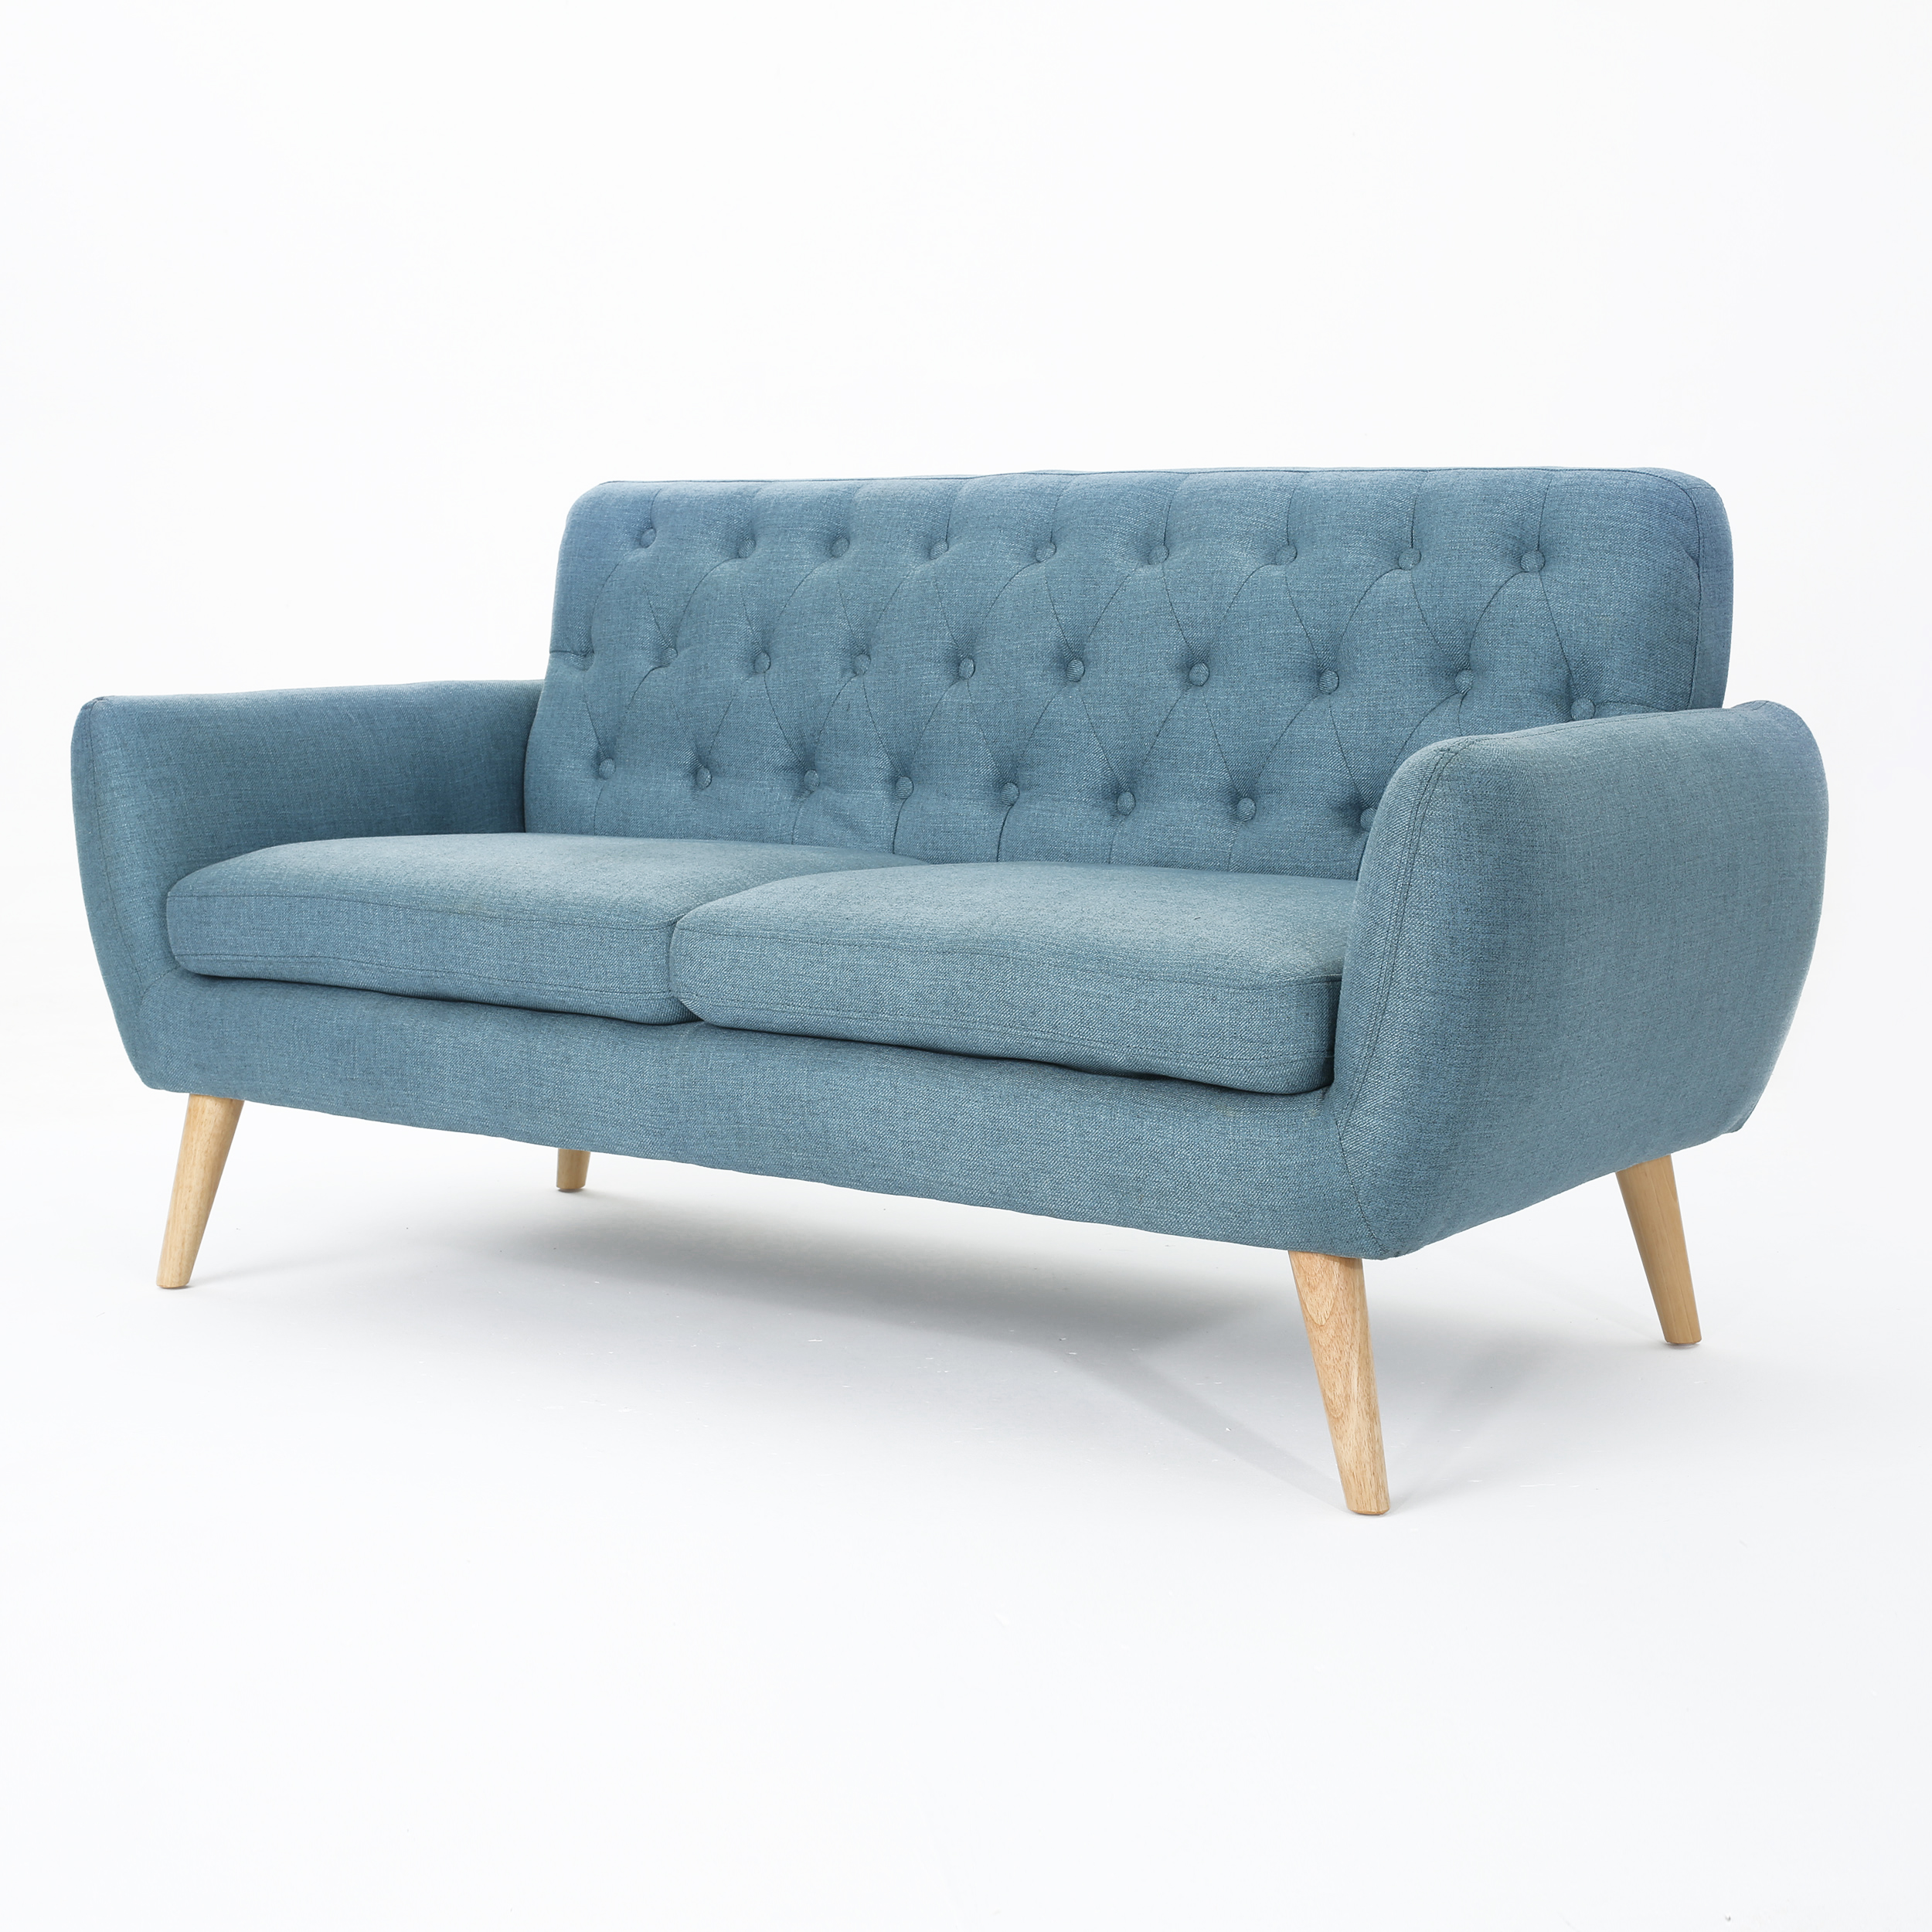 GDF Studio Alscot Mid Century Modern Fabric Tufted Oversized Loveseat, Blue and Natural - image 2 of 8